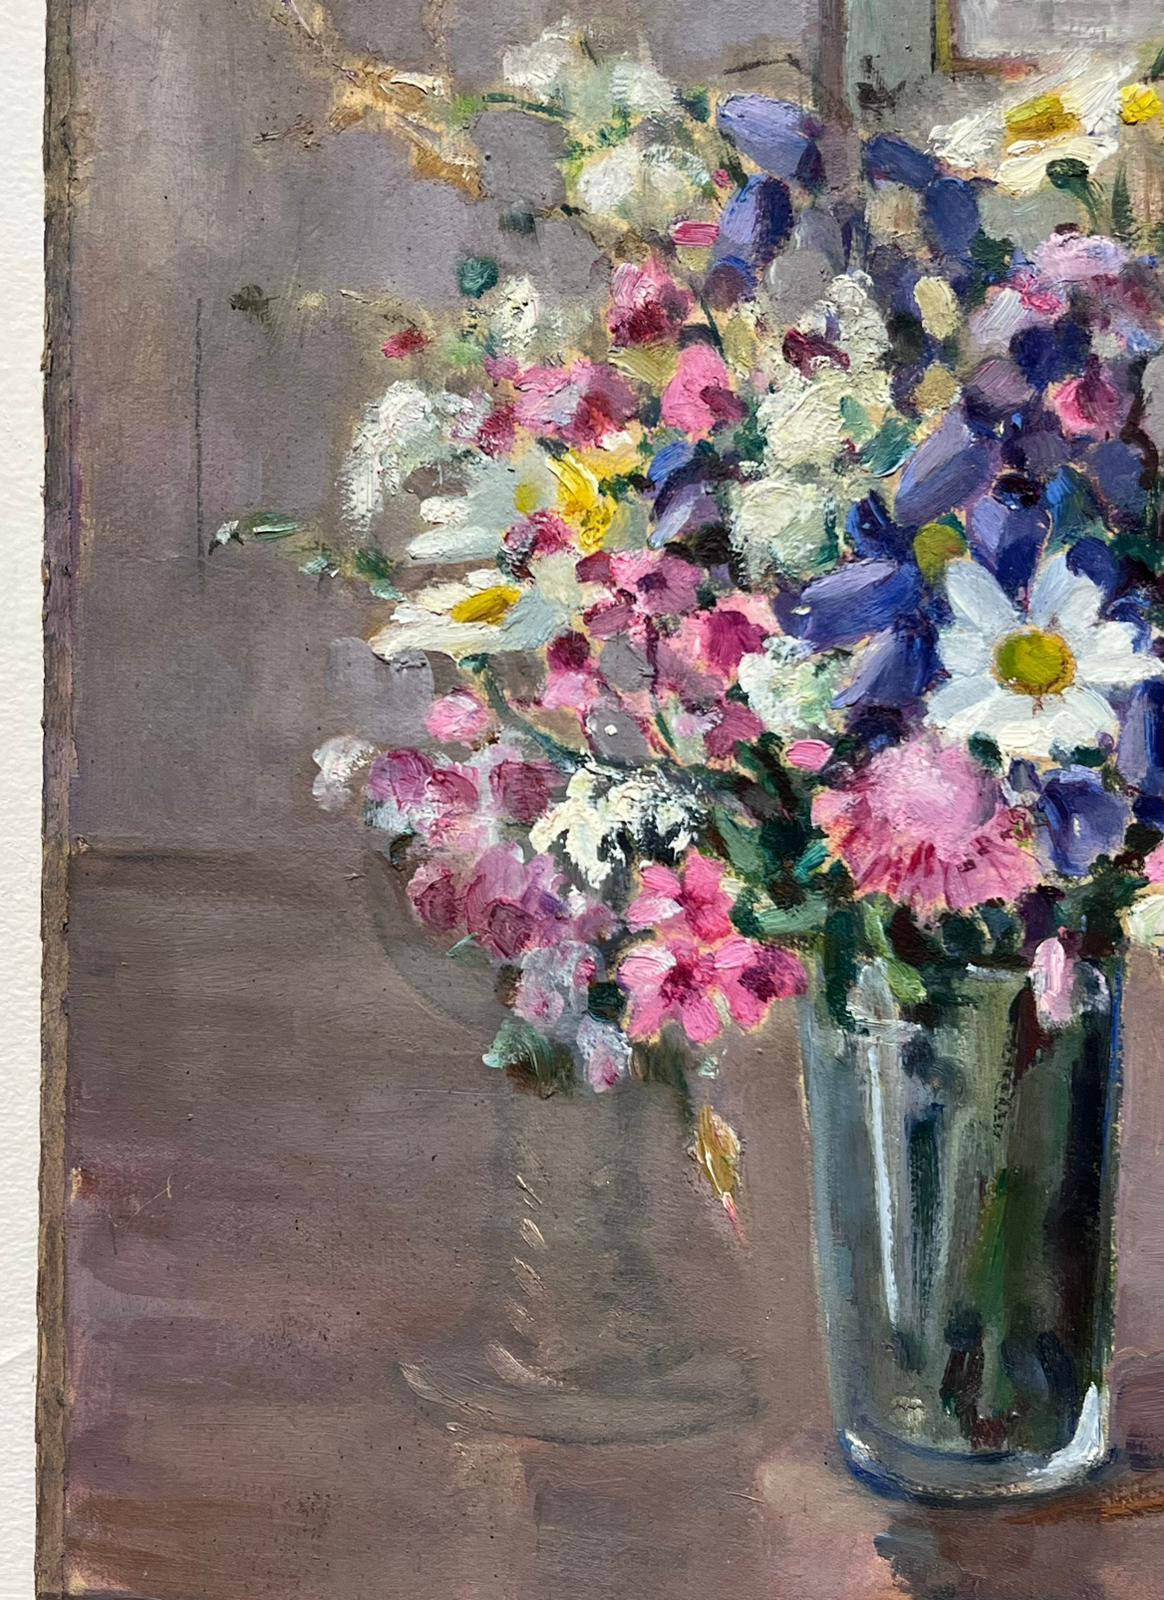 Vase de Fleurs
by Louise Alix (French, 1888-1980) *see notes below
provenance stamp to the back 
signed oil painting on canvas stuck on board, unframed
measures: 16.5 high by 13 inches wide
condition: overall very good and sound, a few scuffs and